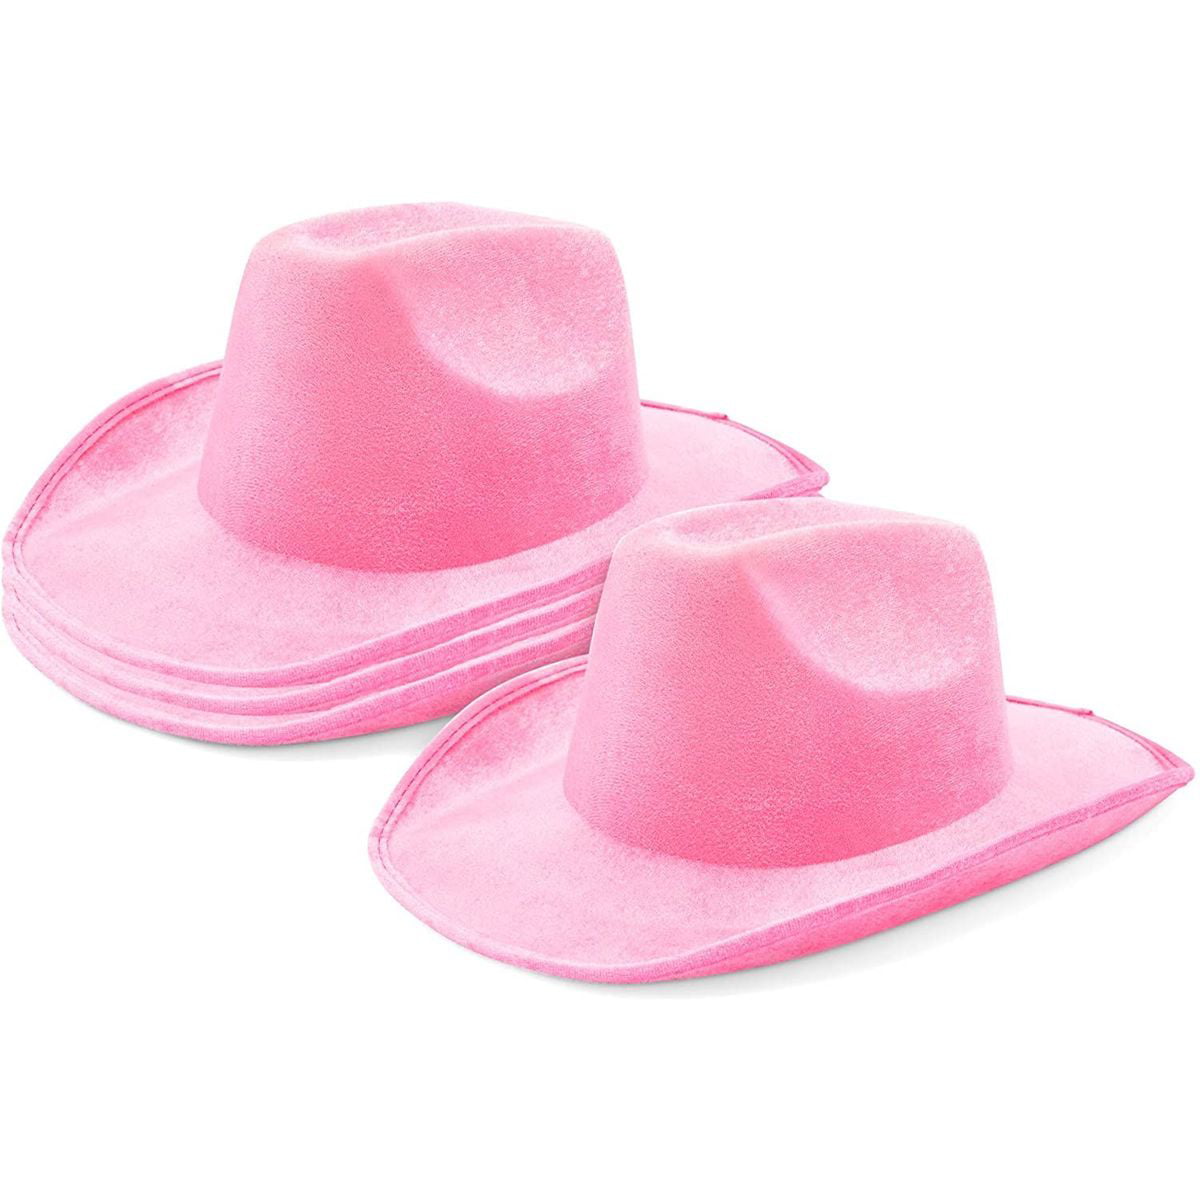 Teen Adult Size Hot Pink Western Cowboy Hat Cattleman Unisex Costume for Party